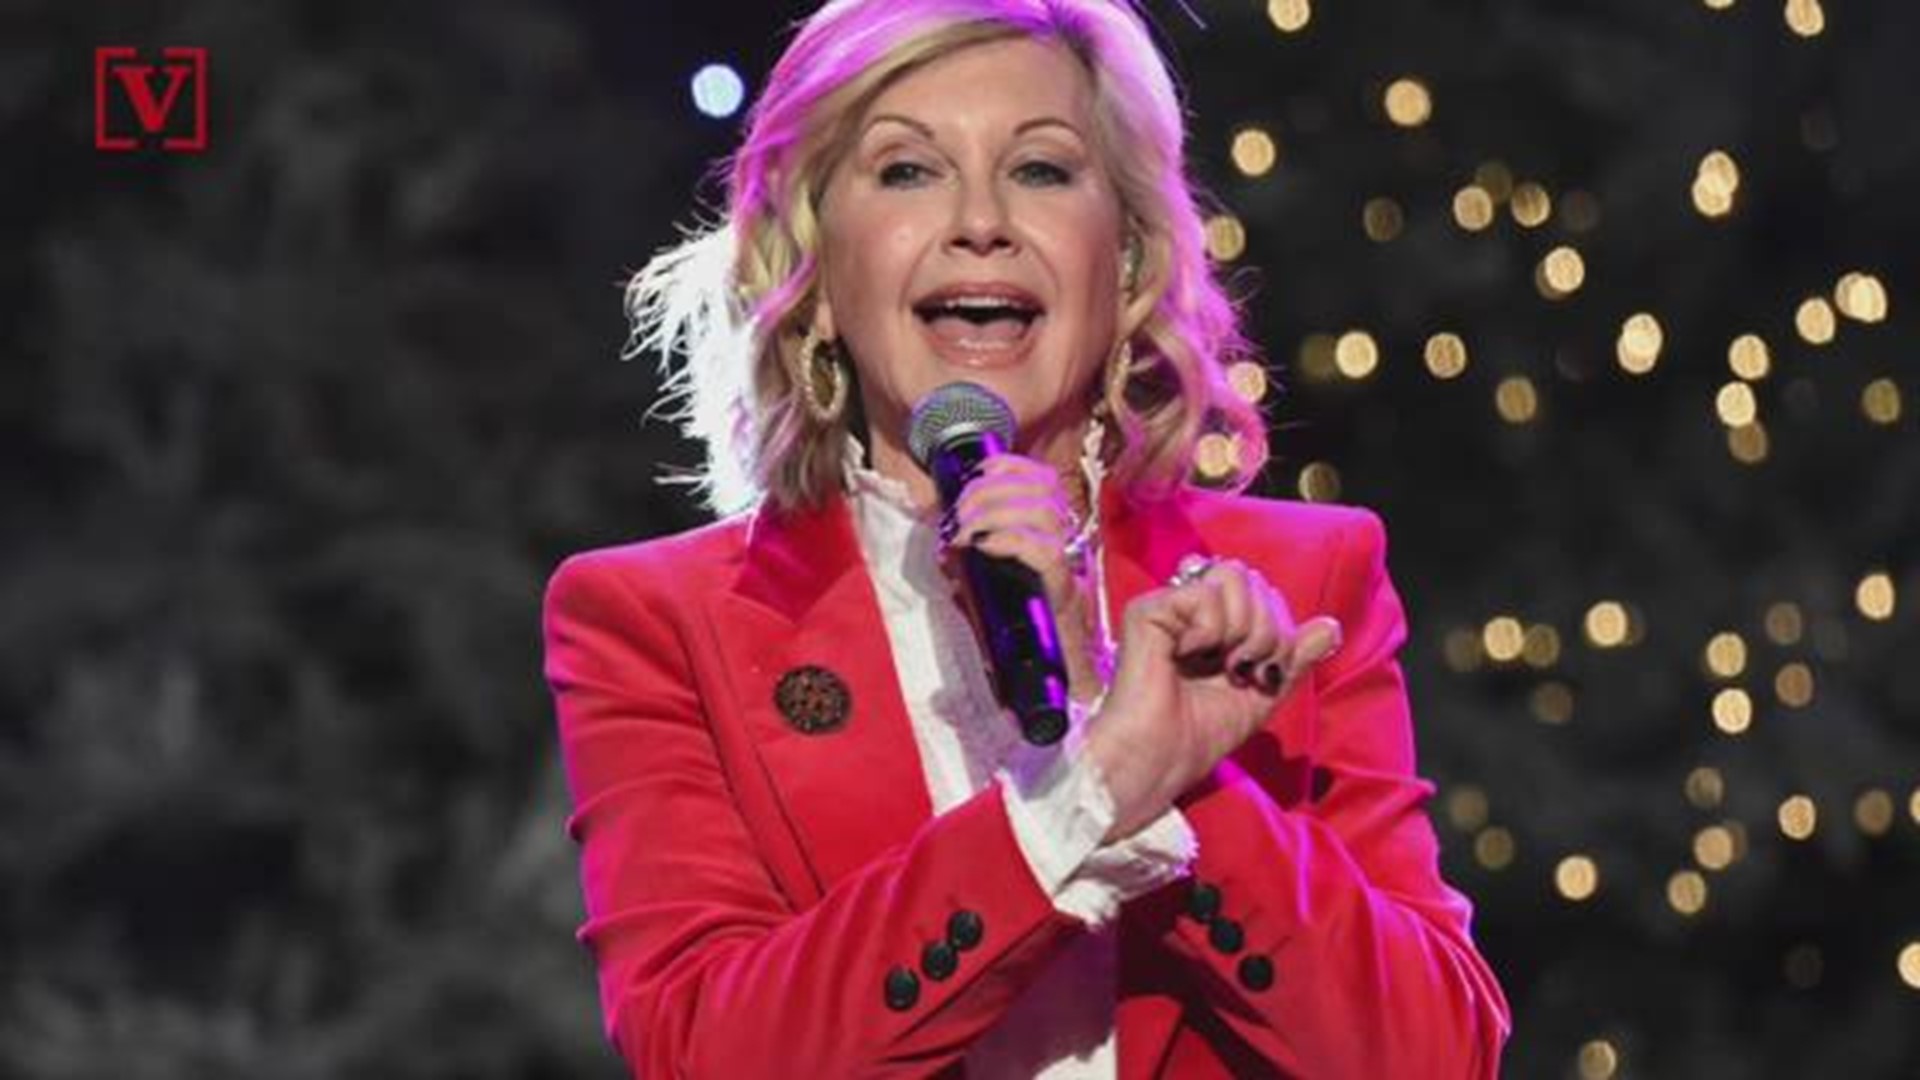 She's battled cancer twice. Now Olivia Newton-John reveals she has been diagnosed with cancer for the third time.